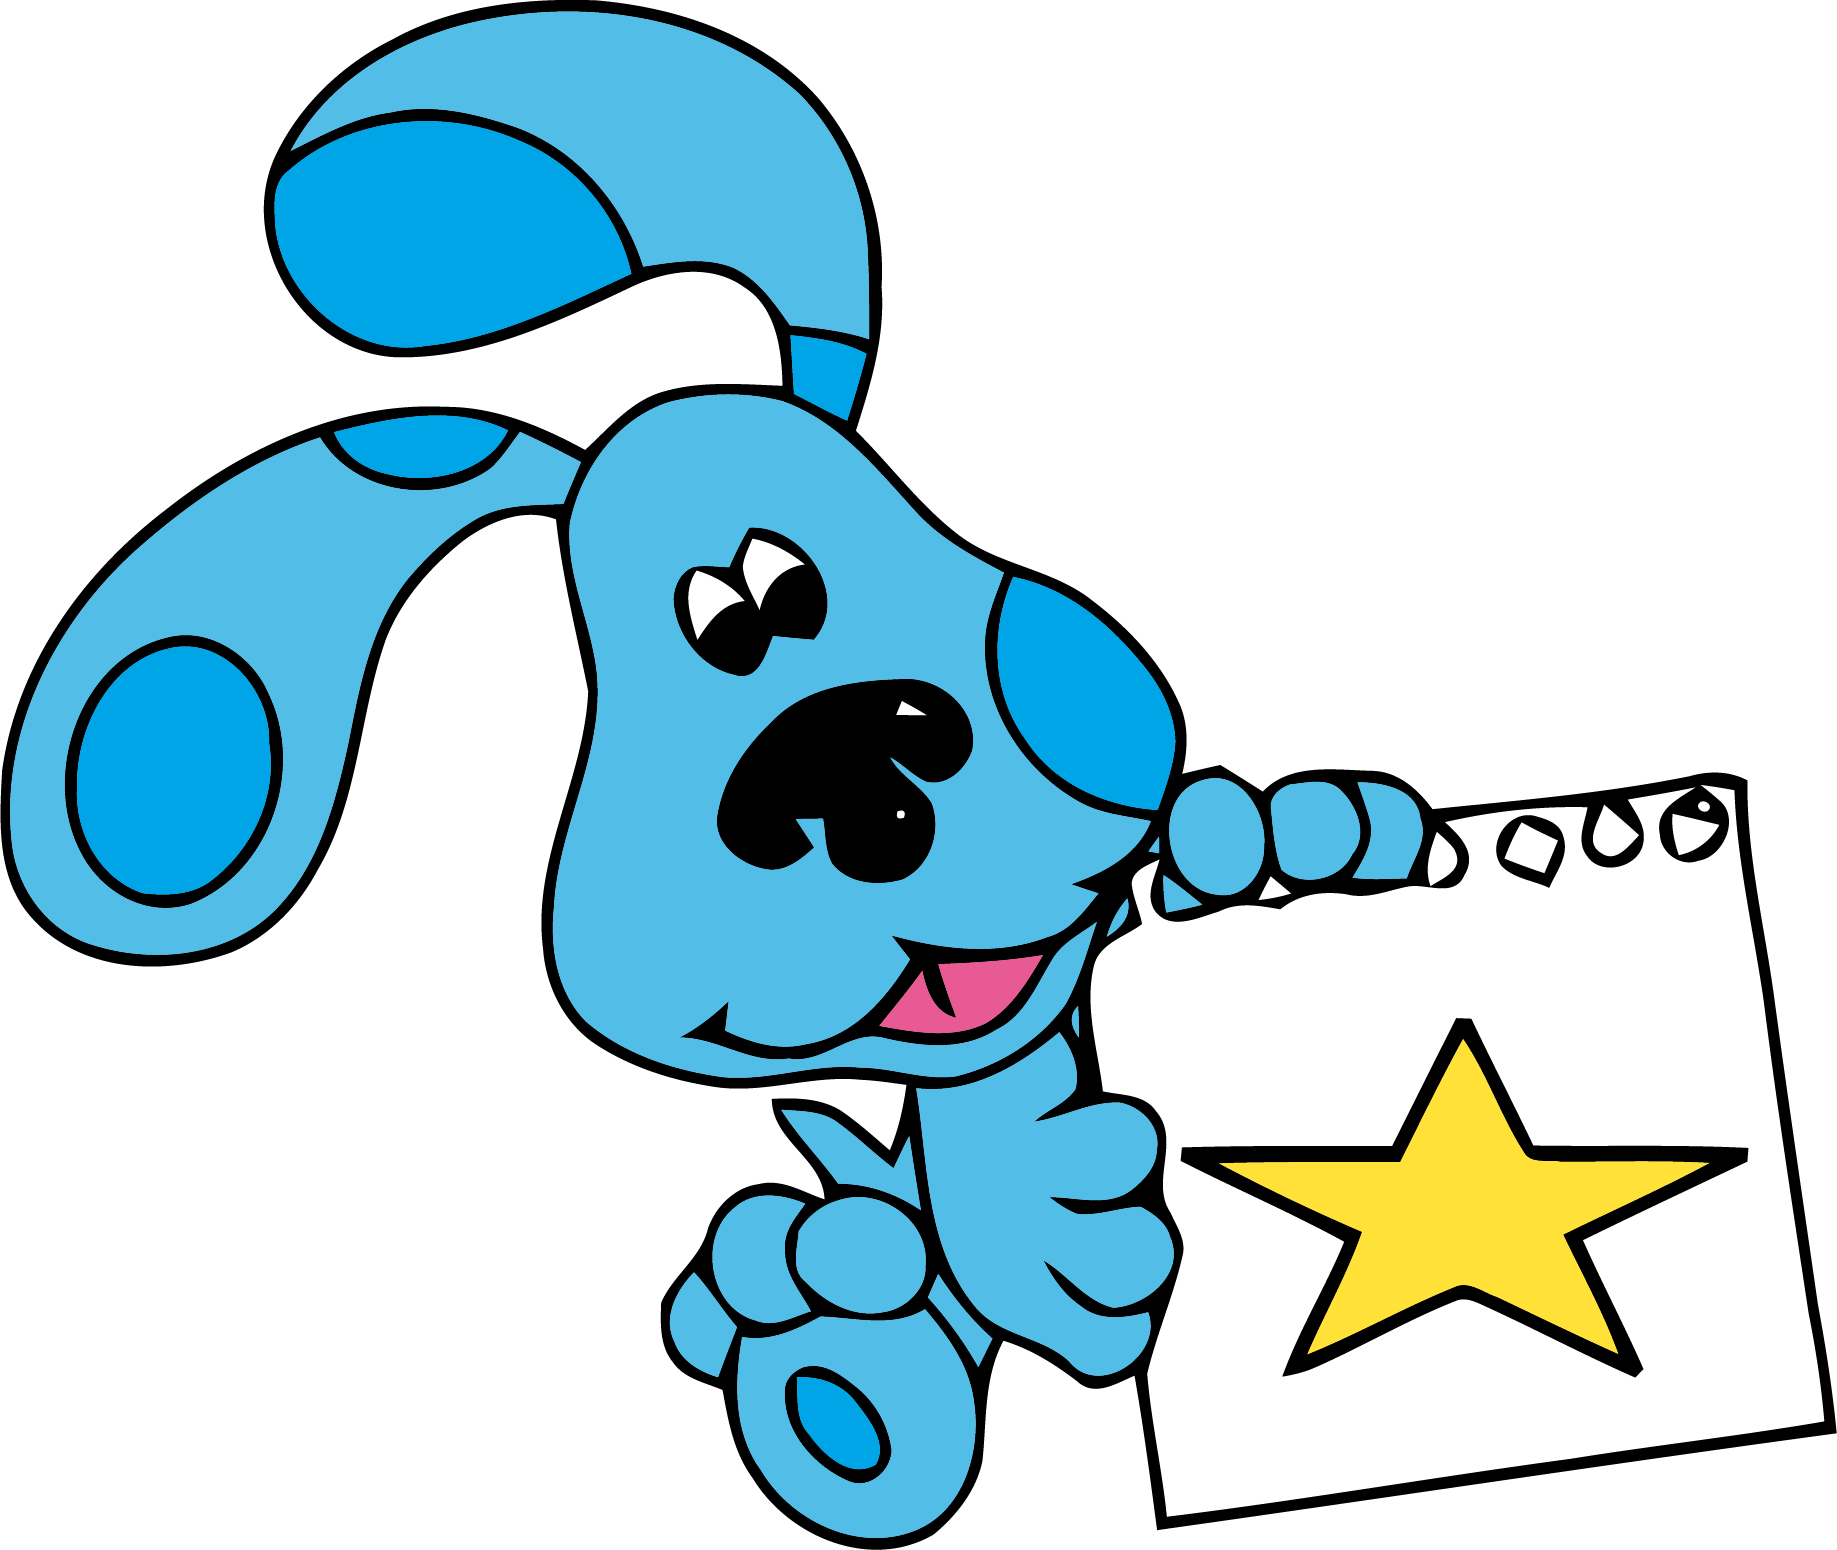 0 Result Images of Transparent Blues Clues Characters Png - PNG Image ...